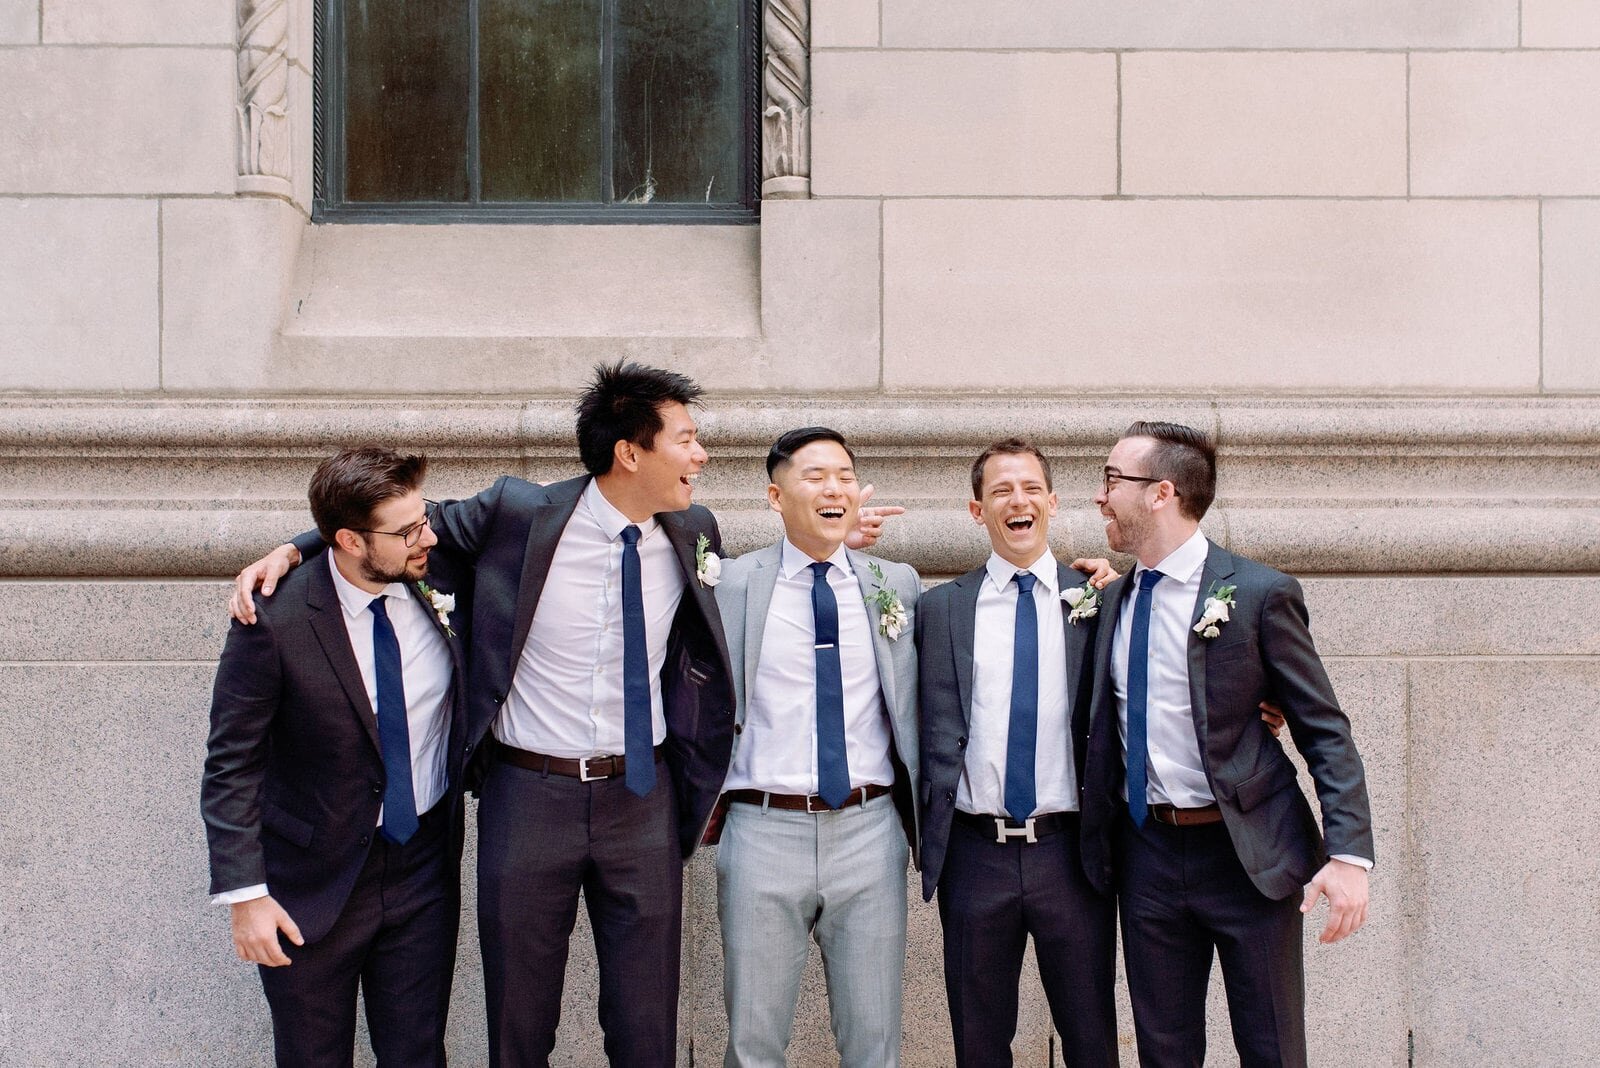 Candid moment Groom with his groomsmen toronto financial district downtown toronto wedding jacqueline james photography